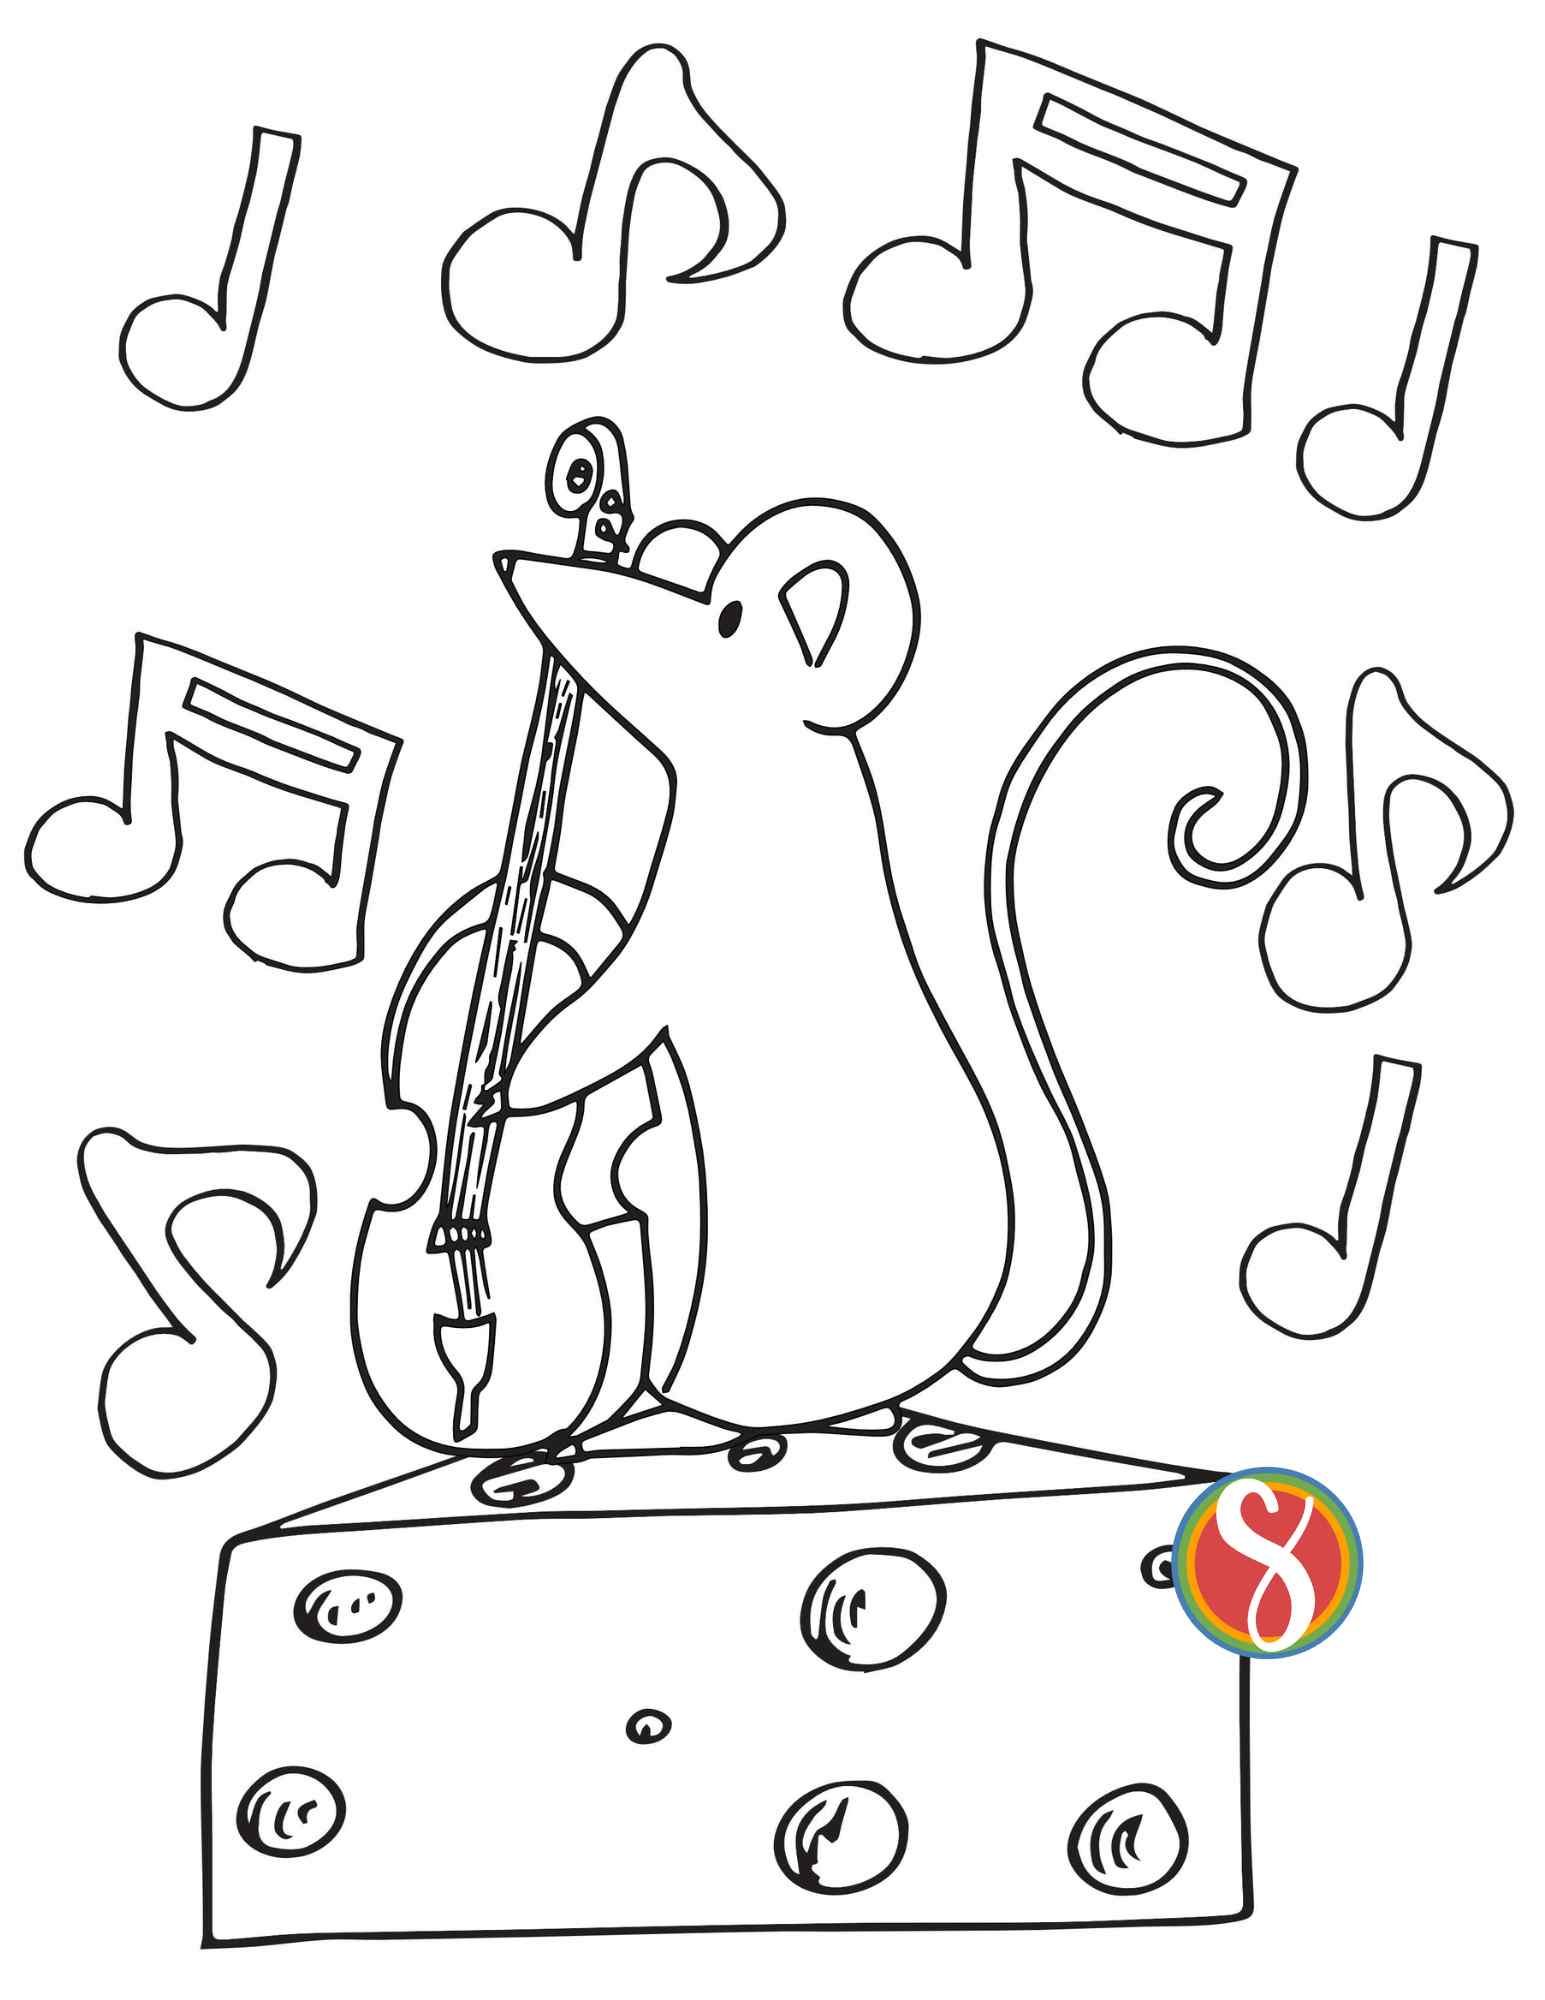 mouse coloring page, mouse playing cello on top of  block of cheese